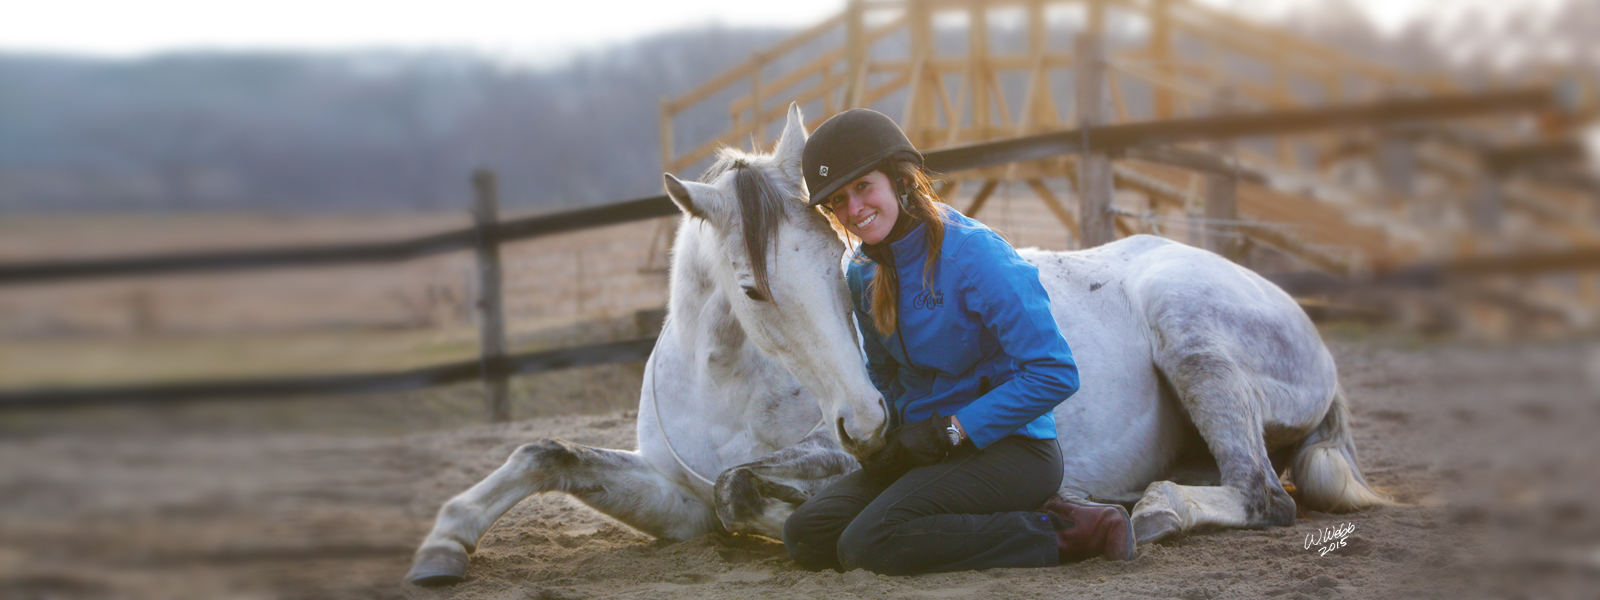 Snuggles with America's Most Wanted Thoroughbred 'Soar'